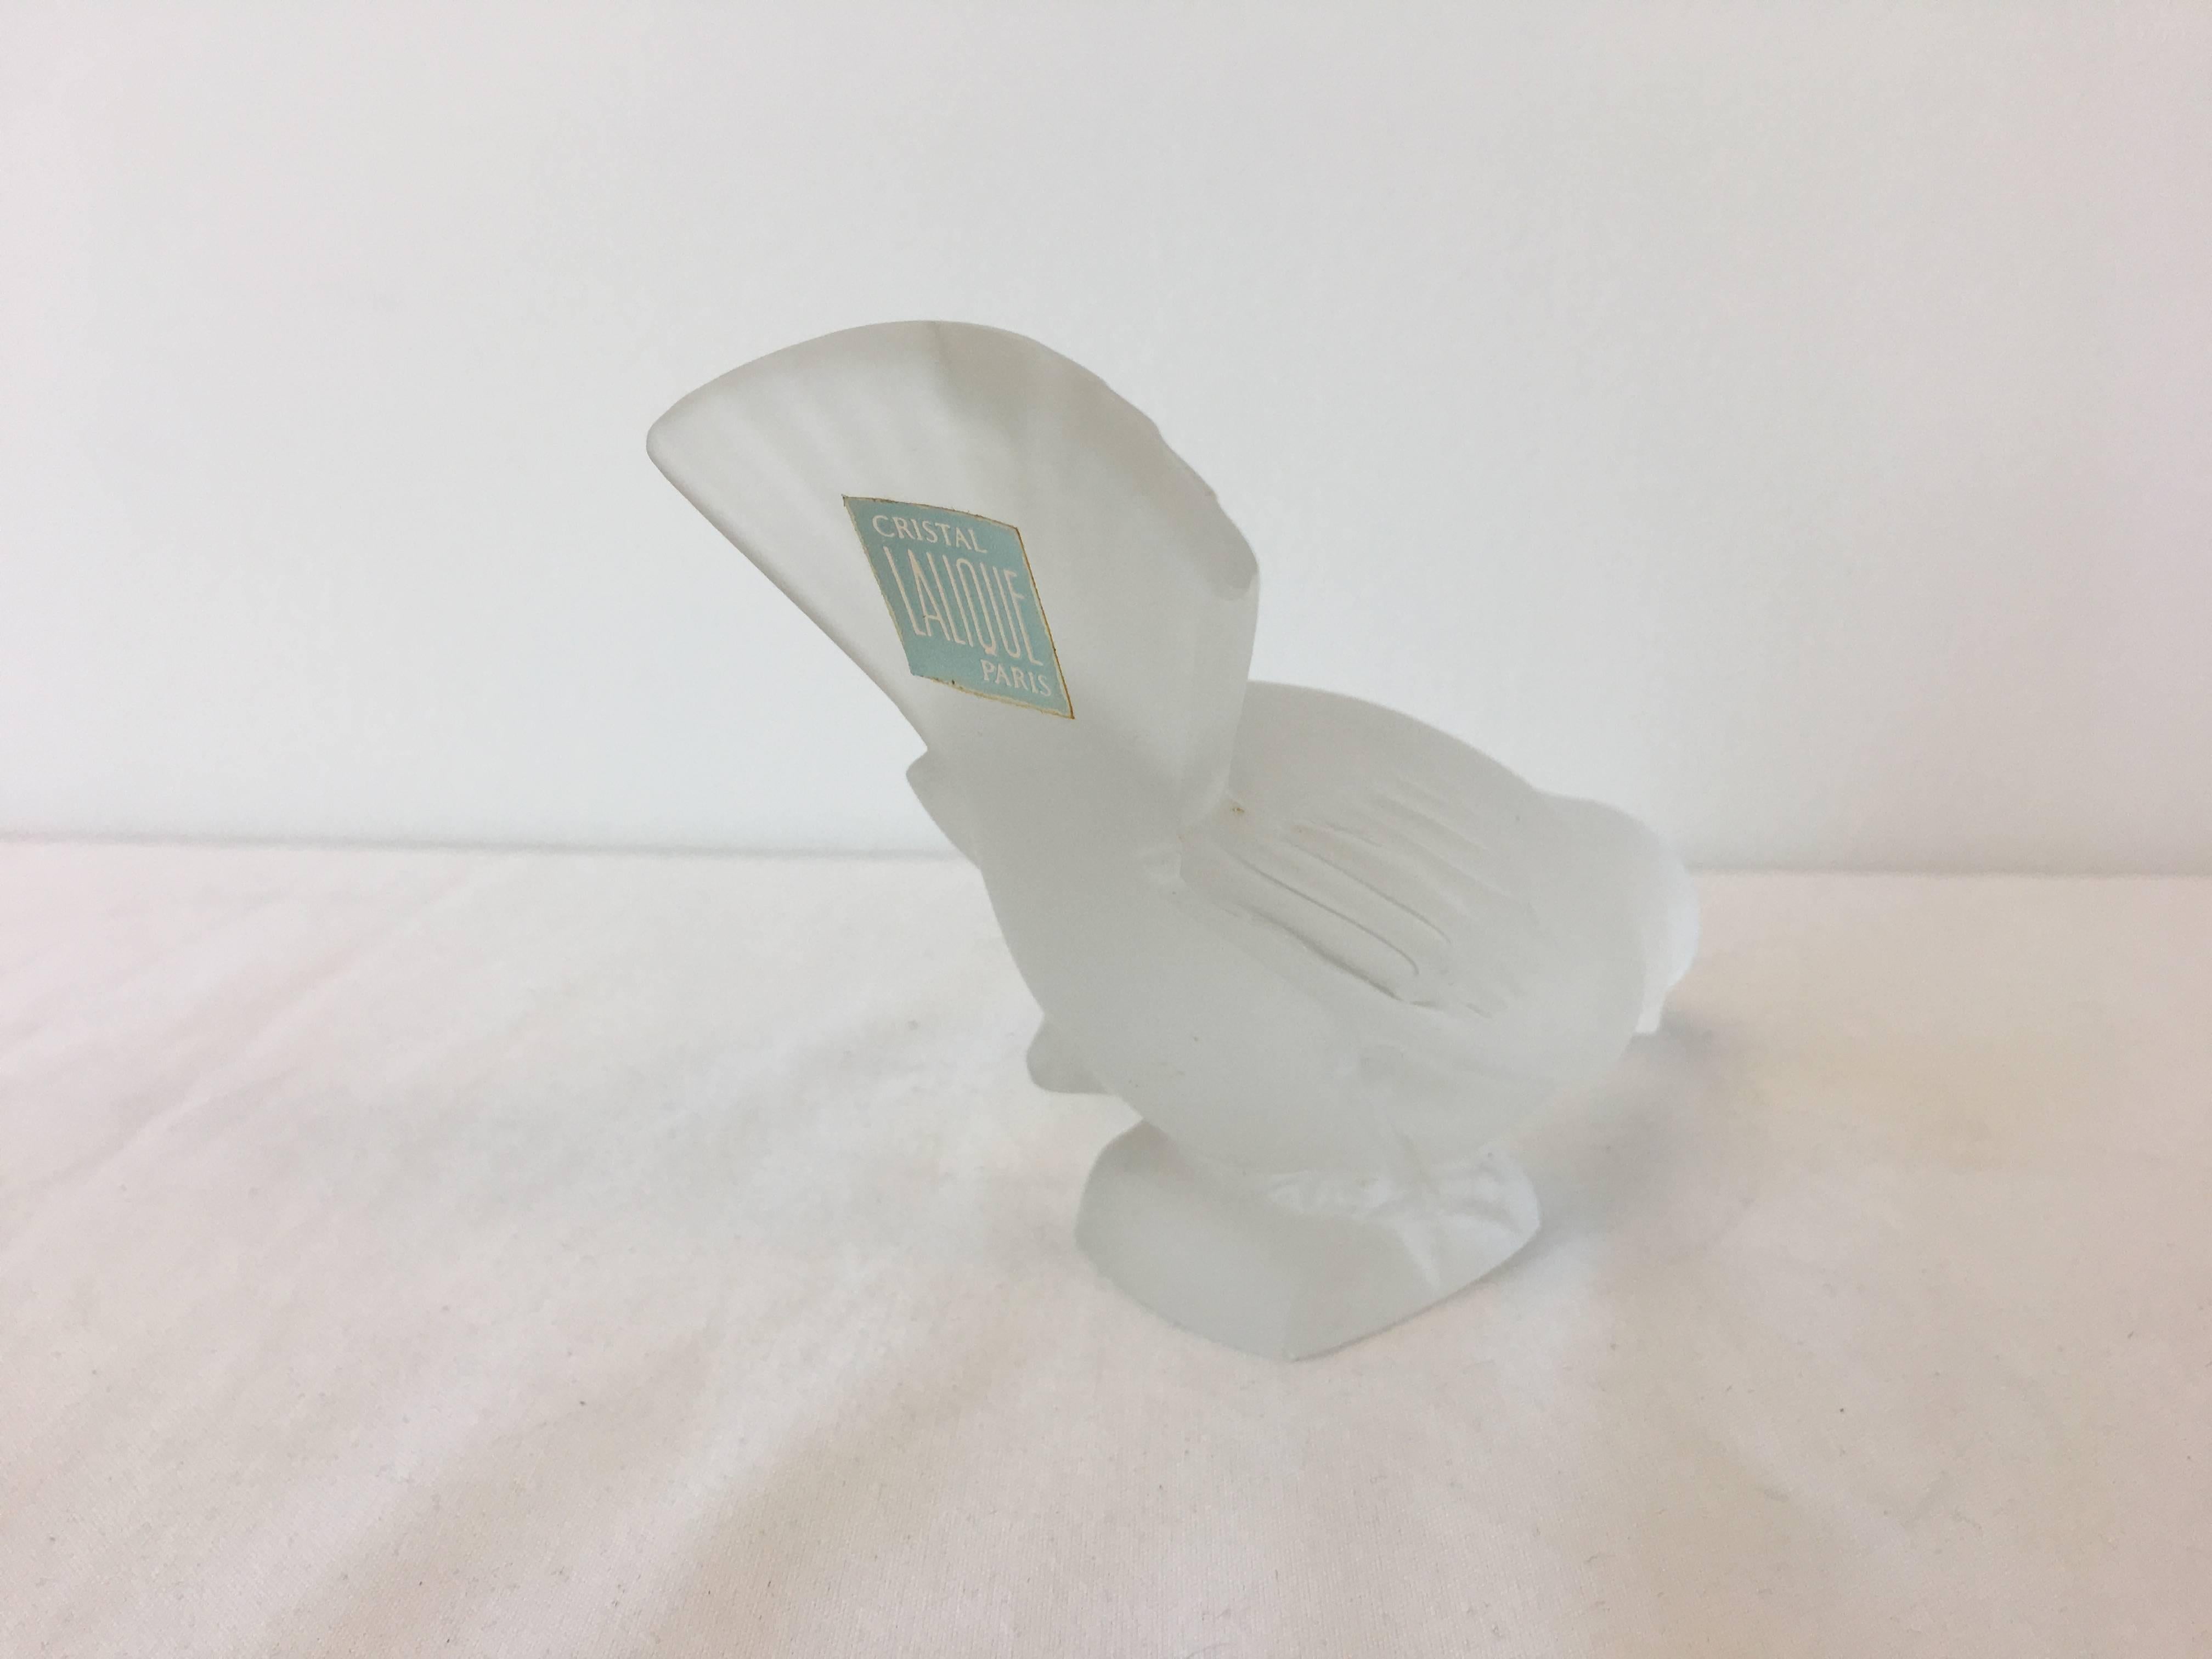 Offered is a beautiful, vintage Lalique crystal sparrow sculpture. Marked 'Lalique France' on base. Includes original Lalique sticker on base, can be removed.